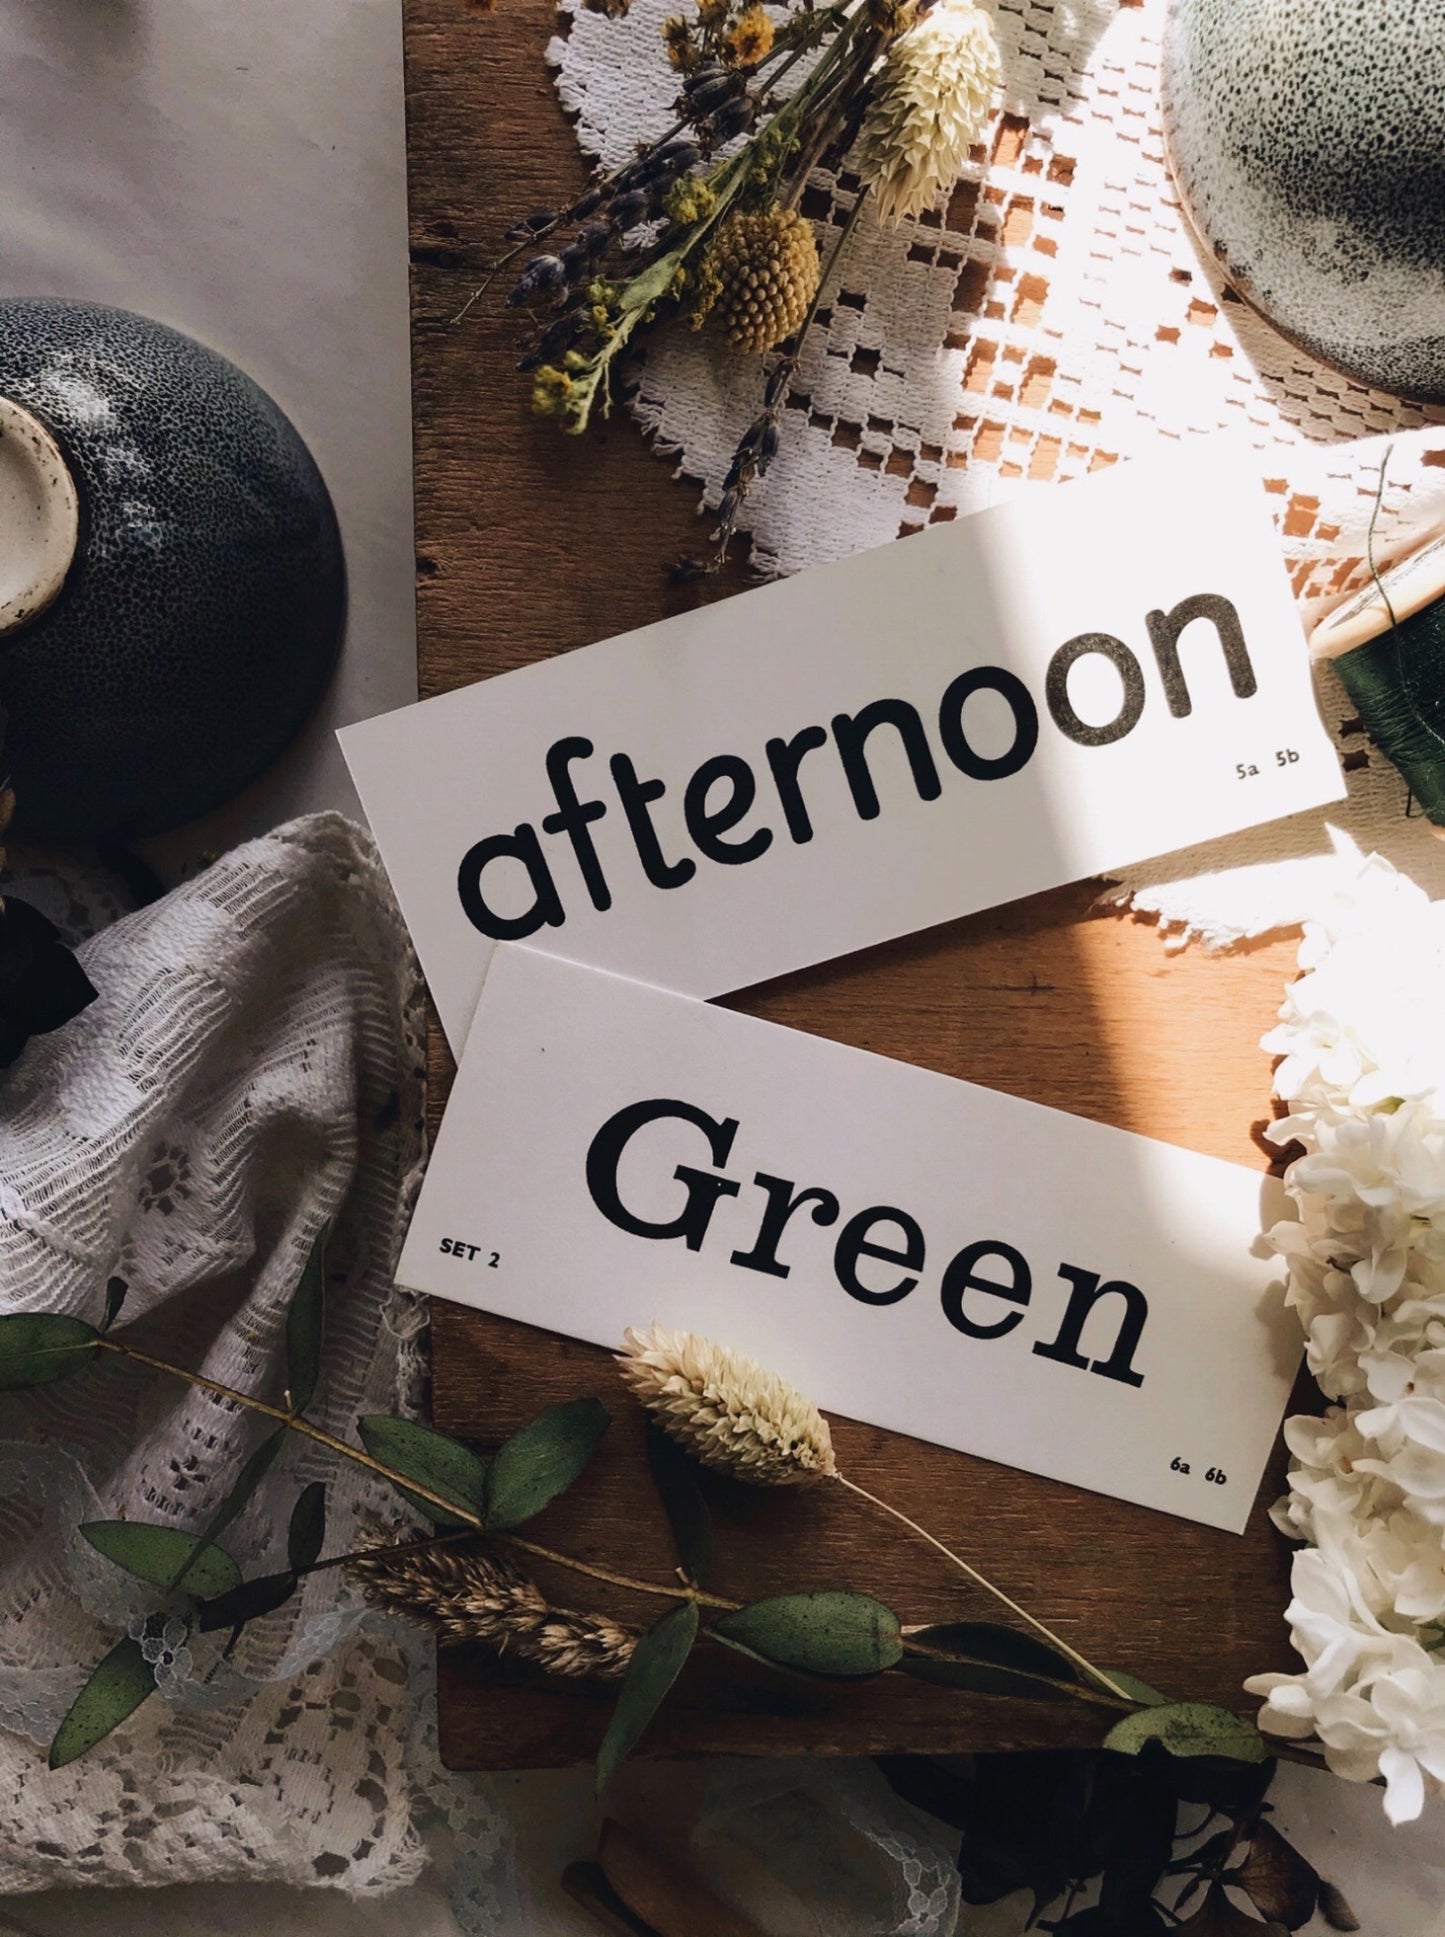 Duo of Retro Word Cards ~ Afternoon & Green